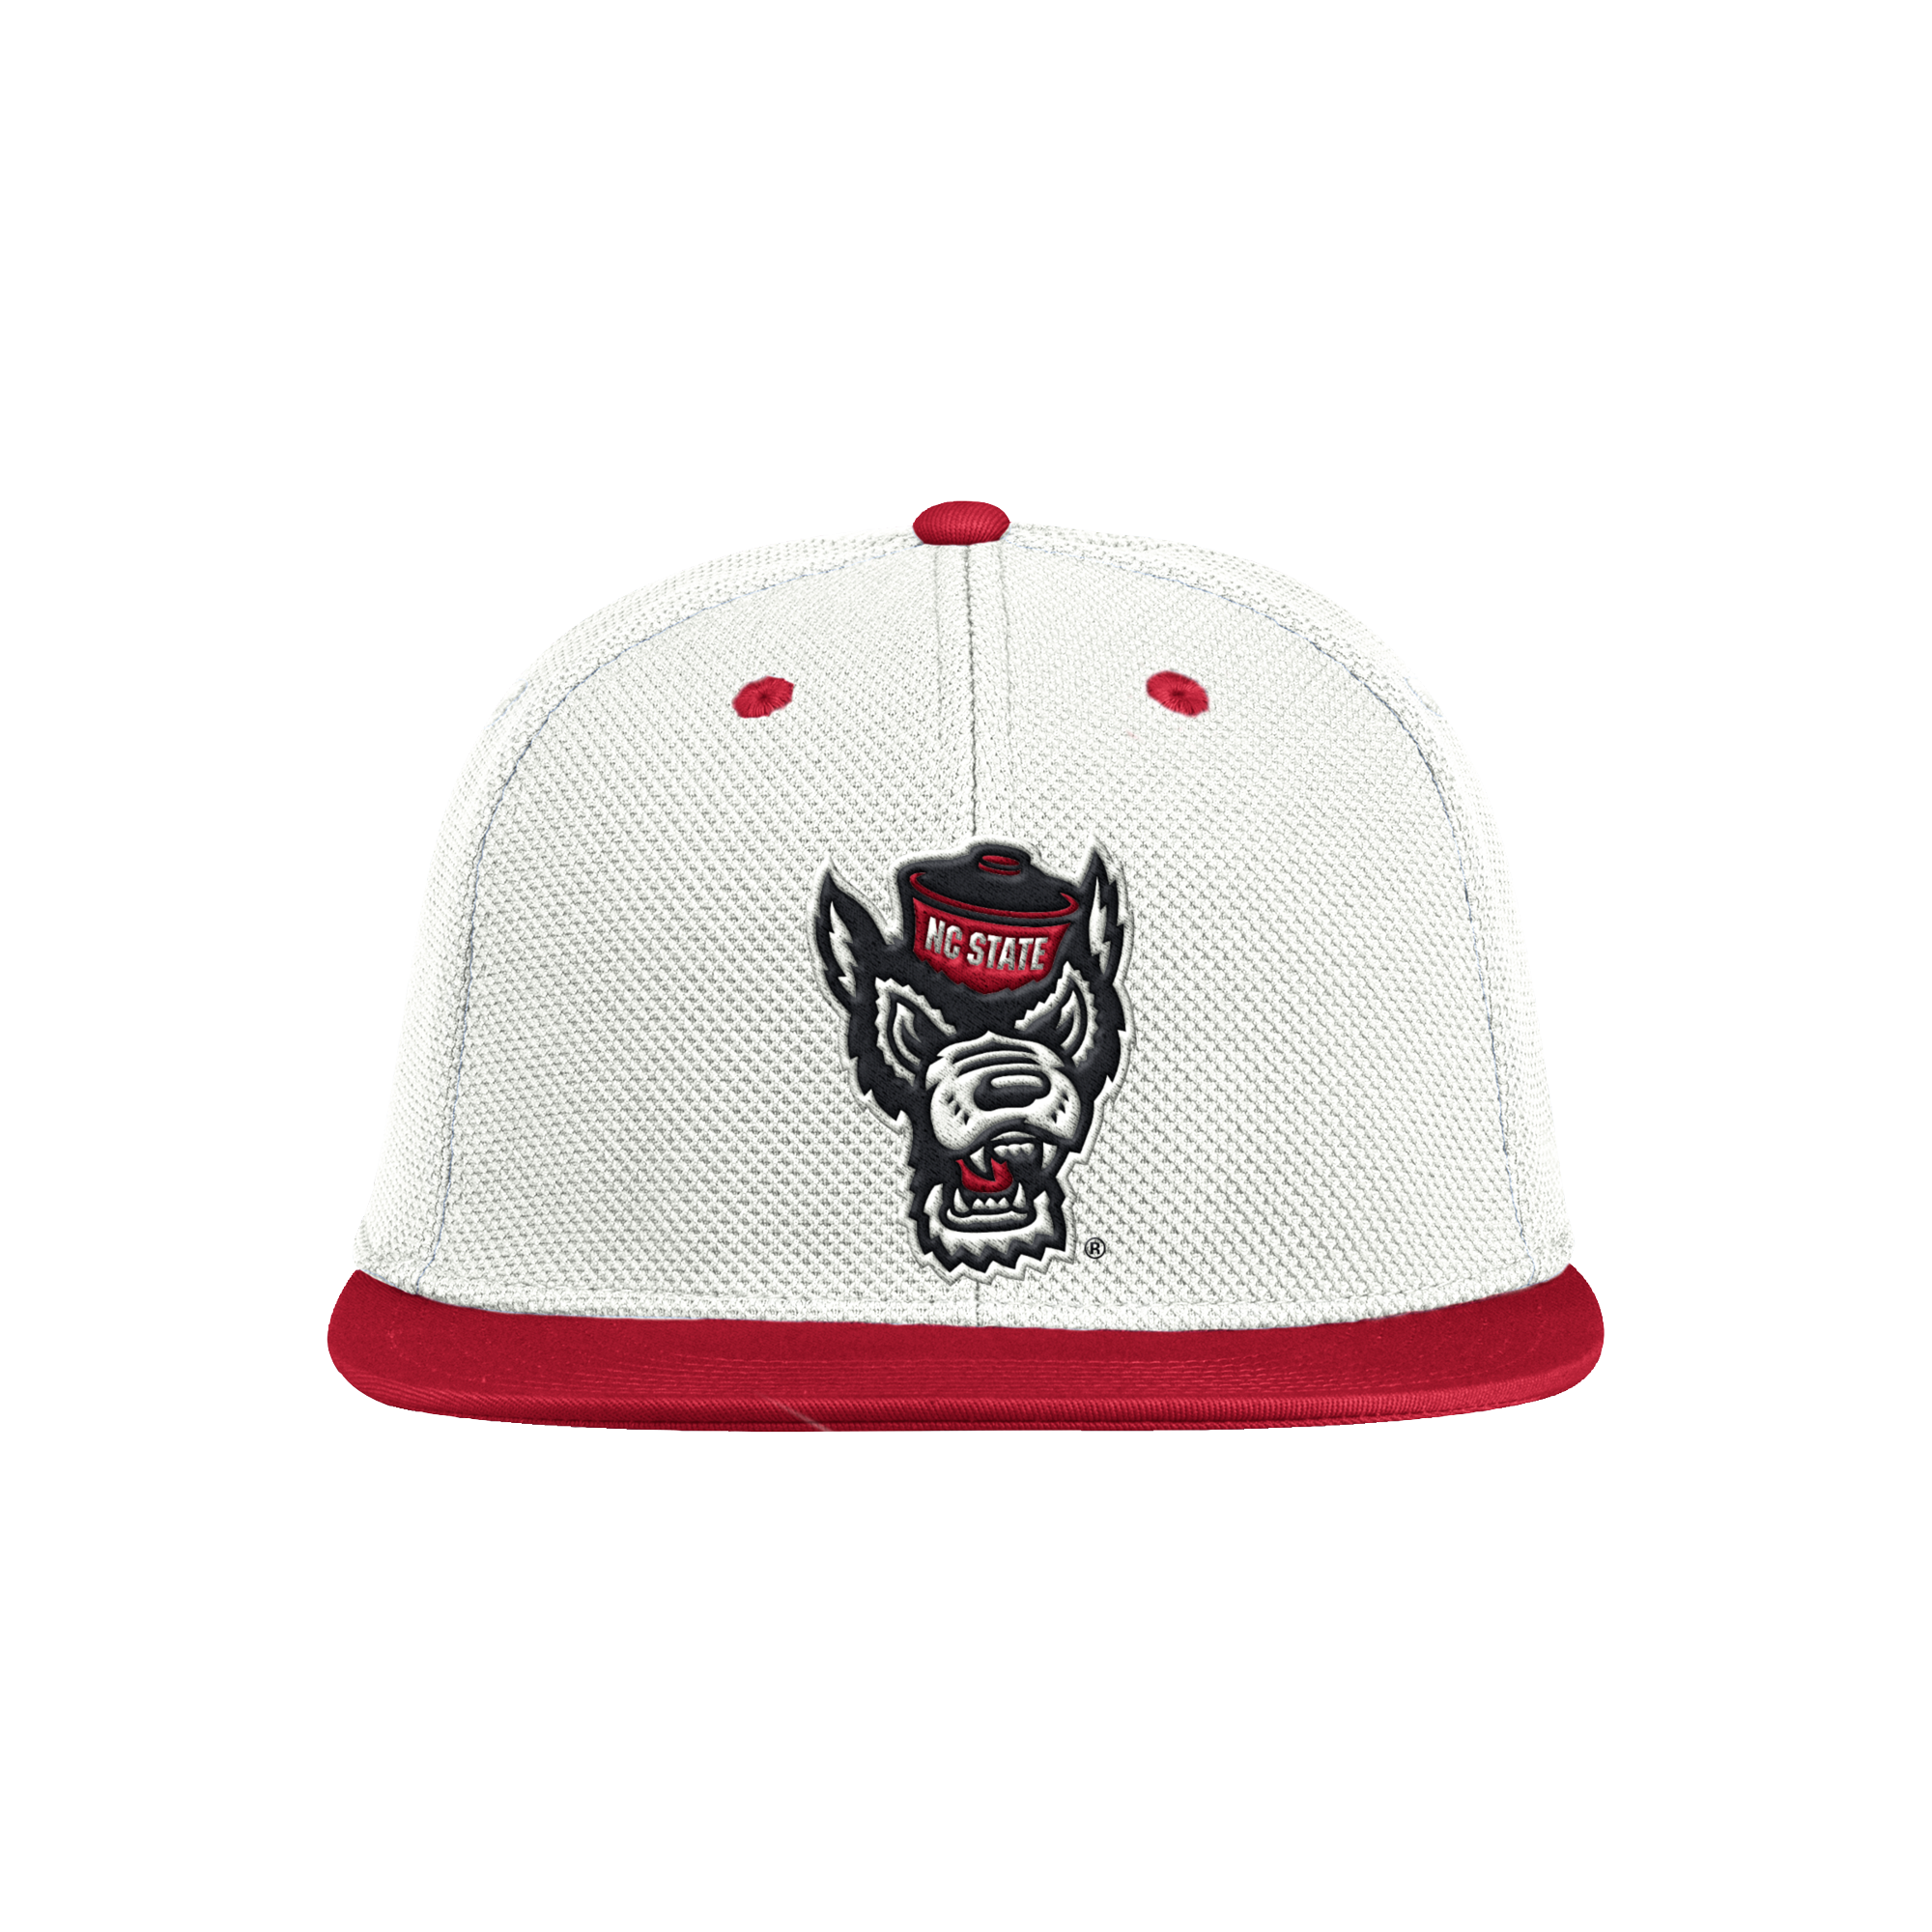 NC State Wolfpack Adidas White w/ Red Bill On-Field Baseball Fitted Mesh Hat